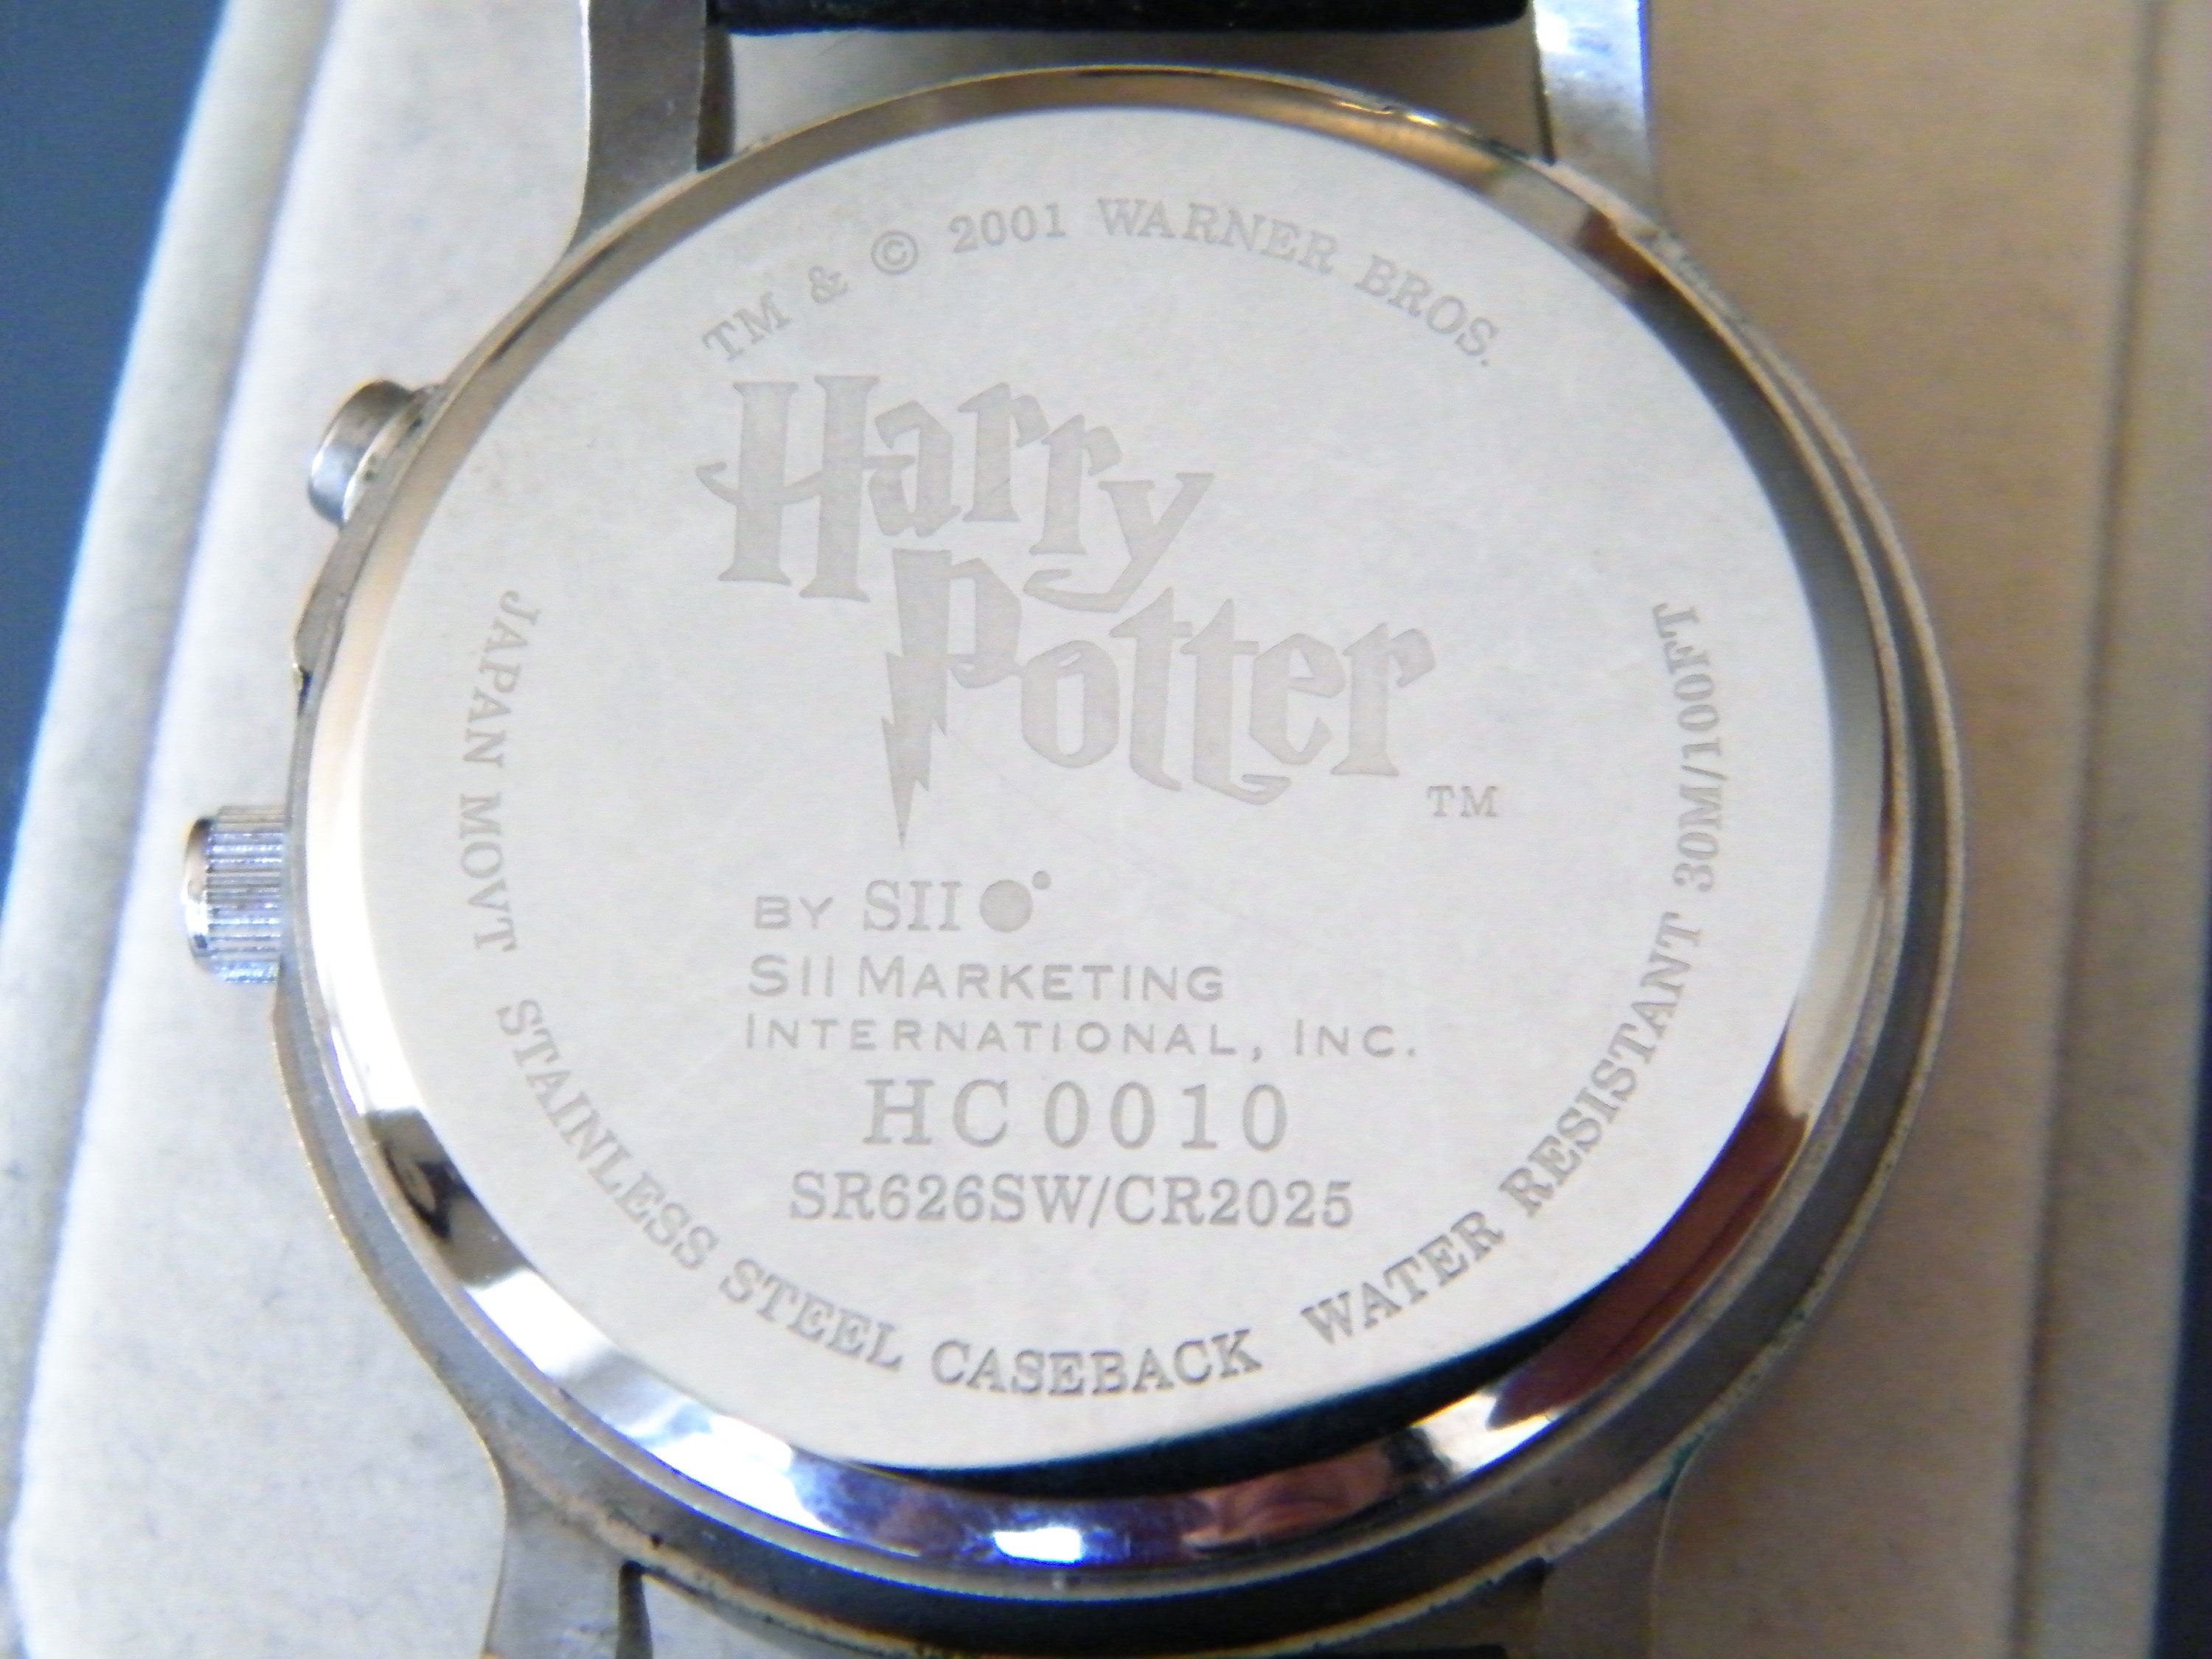 Order Harry Potter Snitch Hand Watch Online From Jerry's Quirky Hub